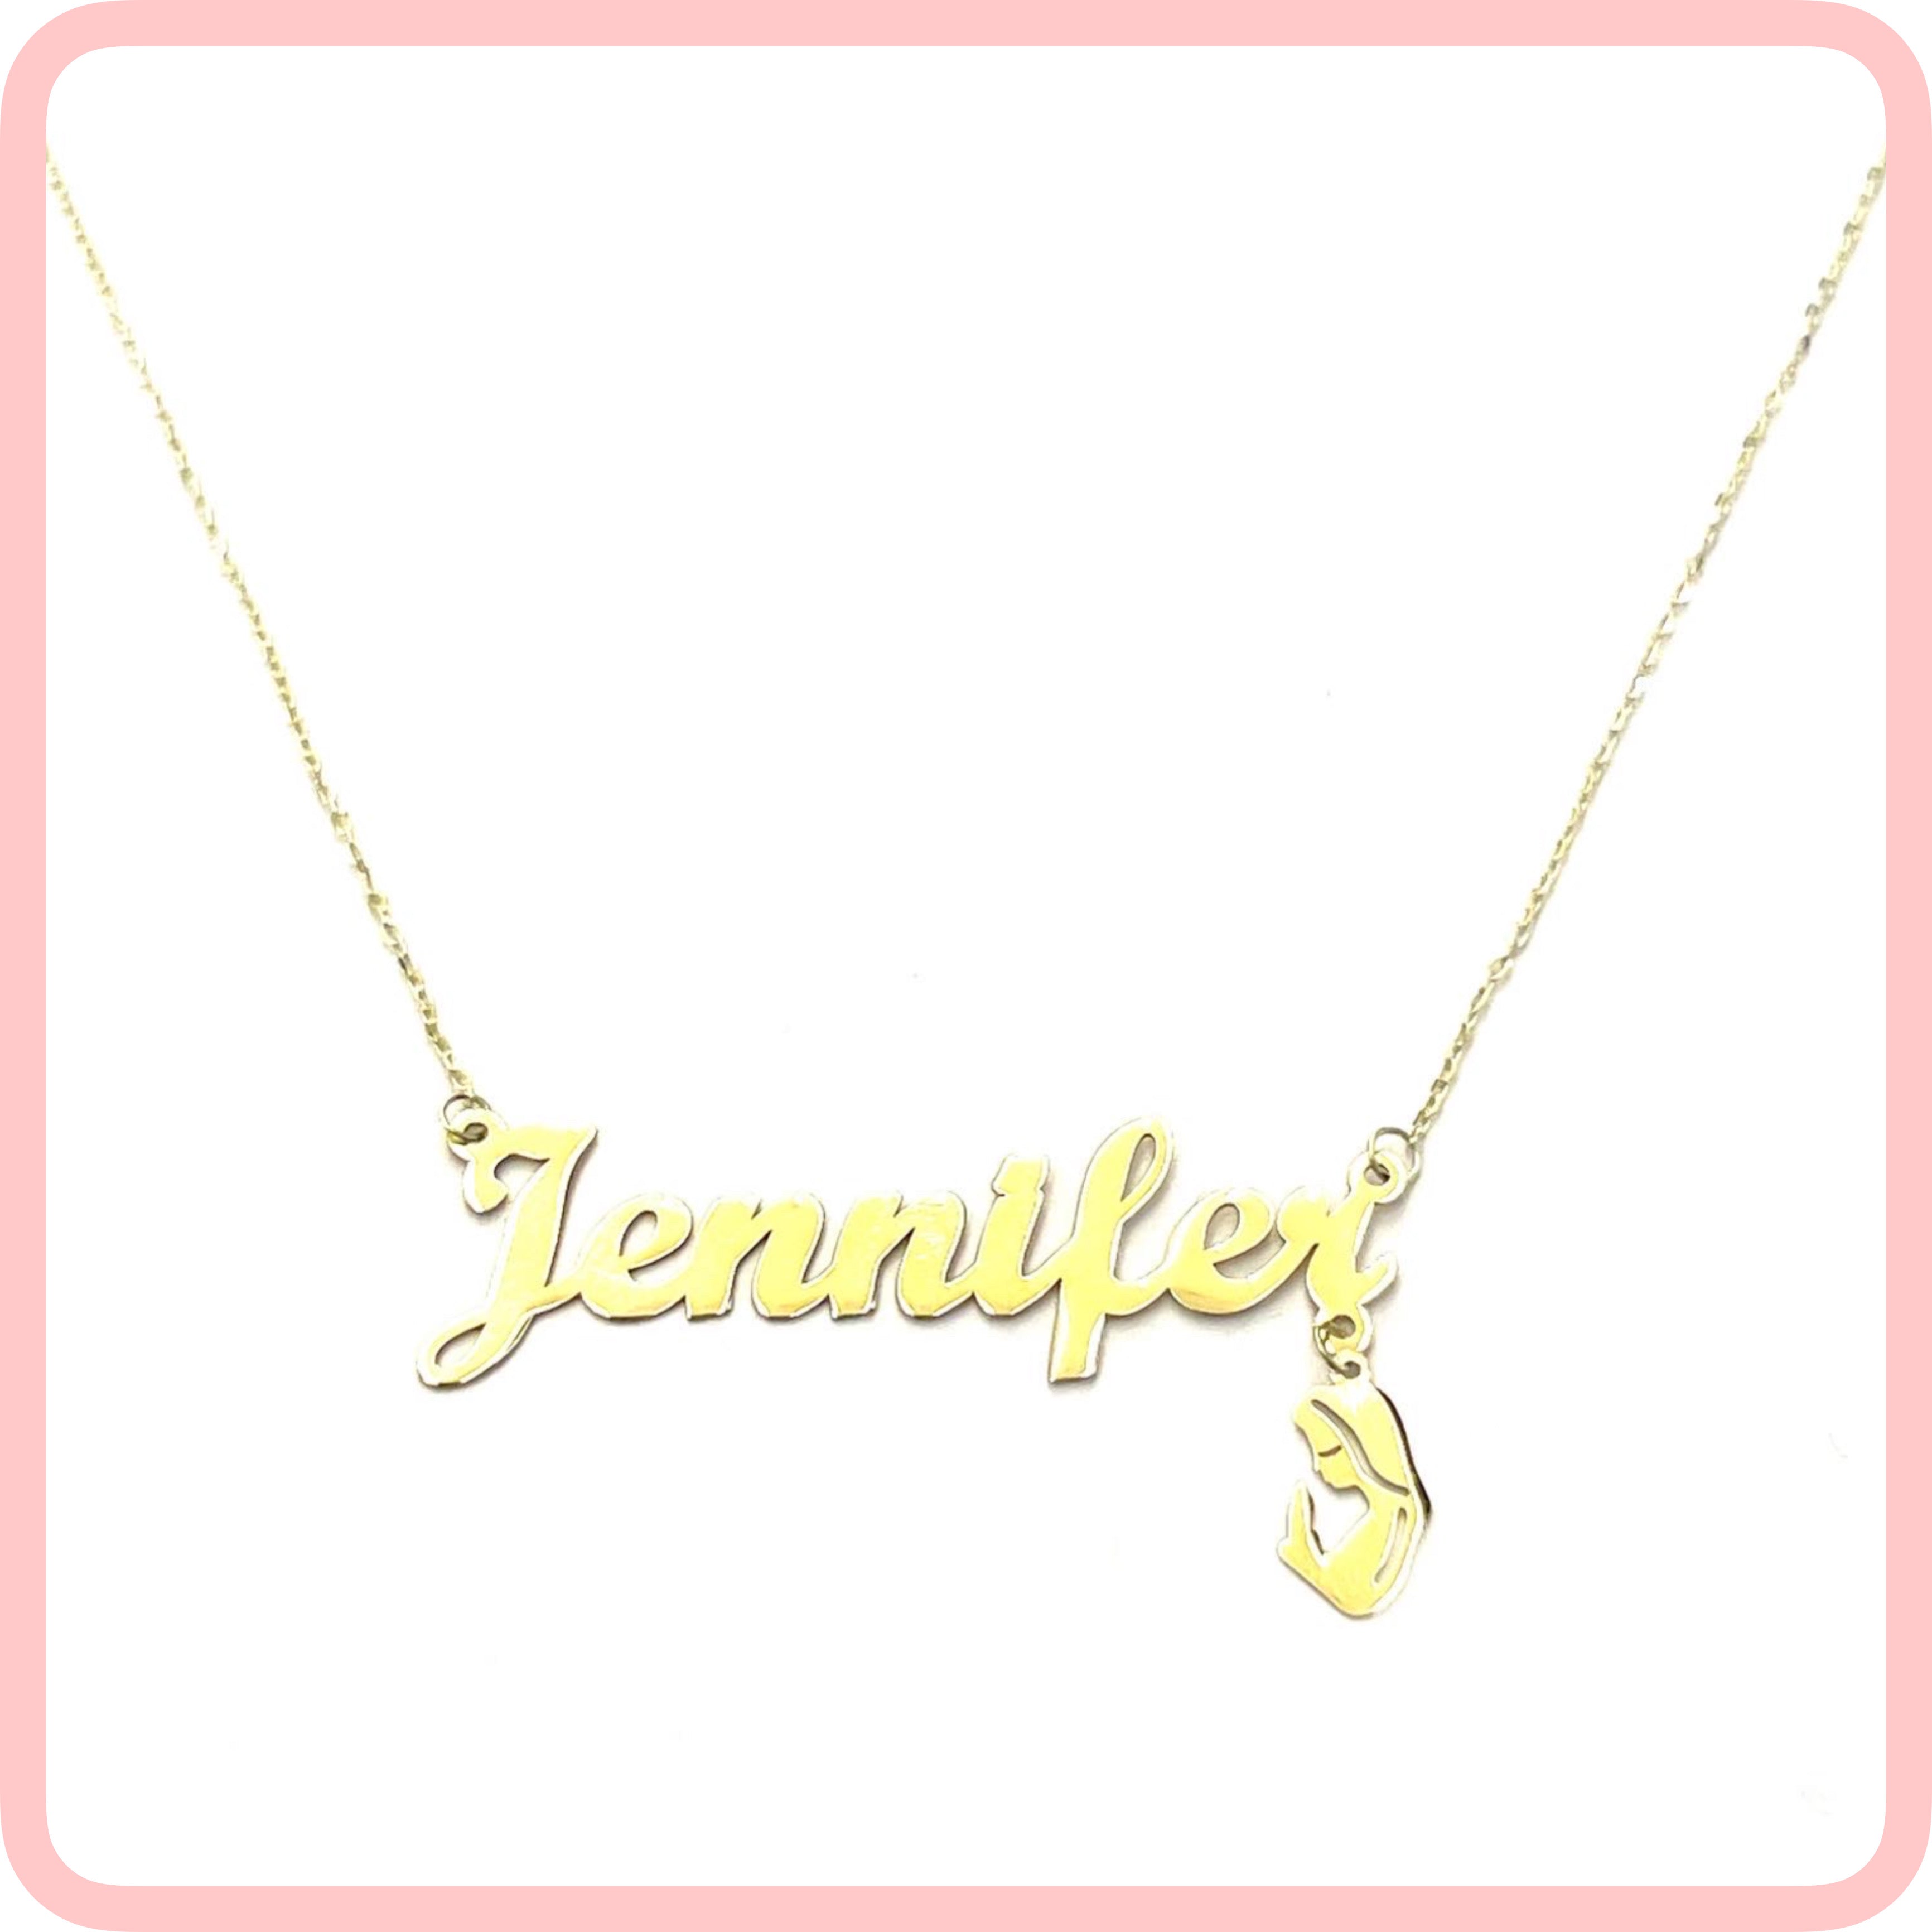 Name With Hanging Charm Necklace